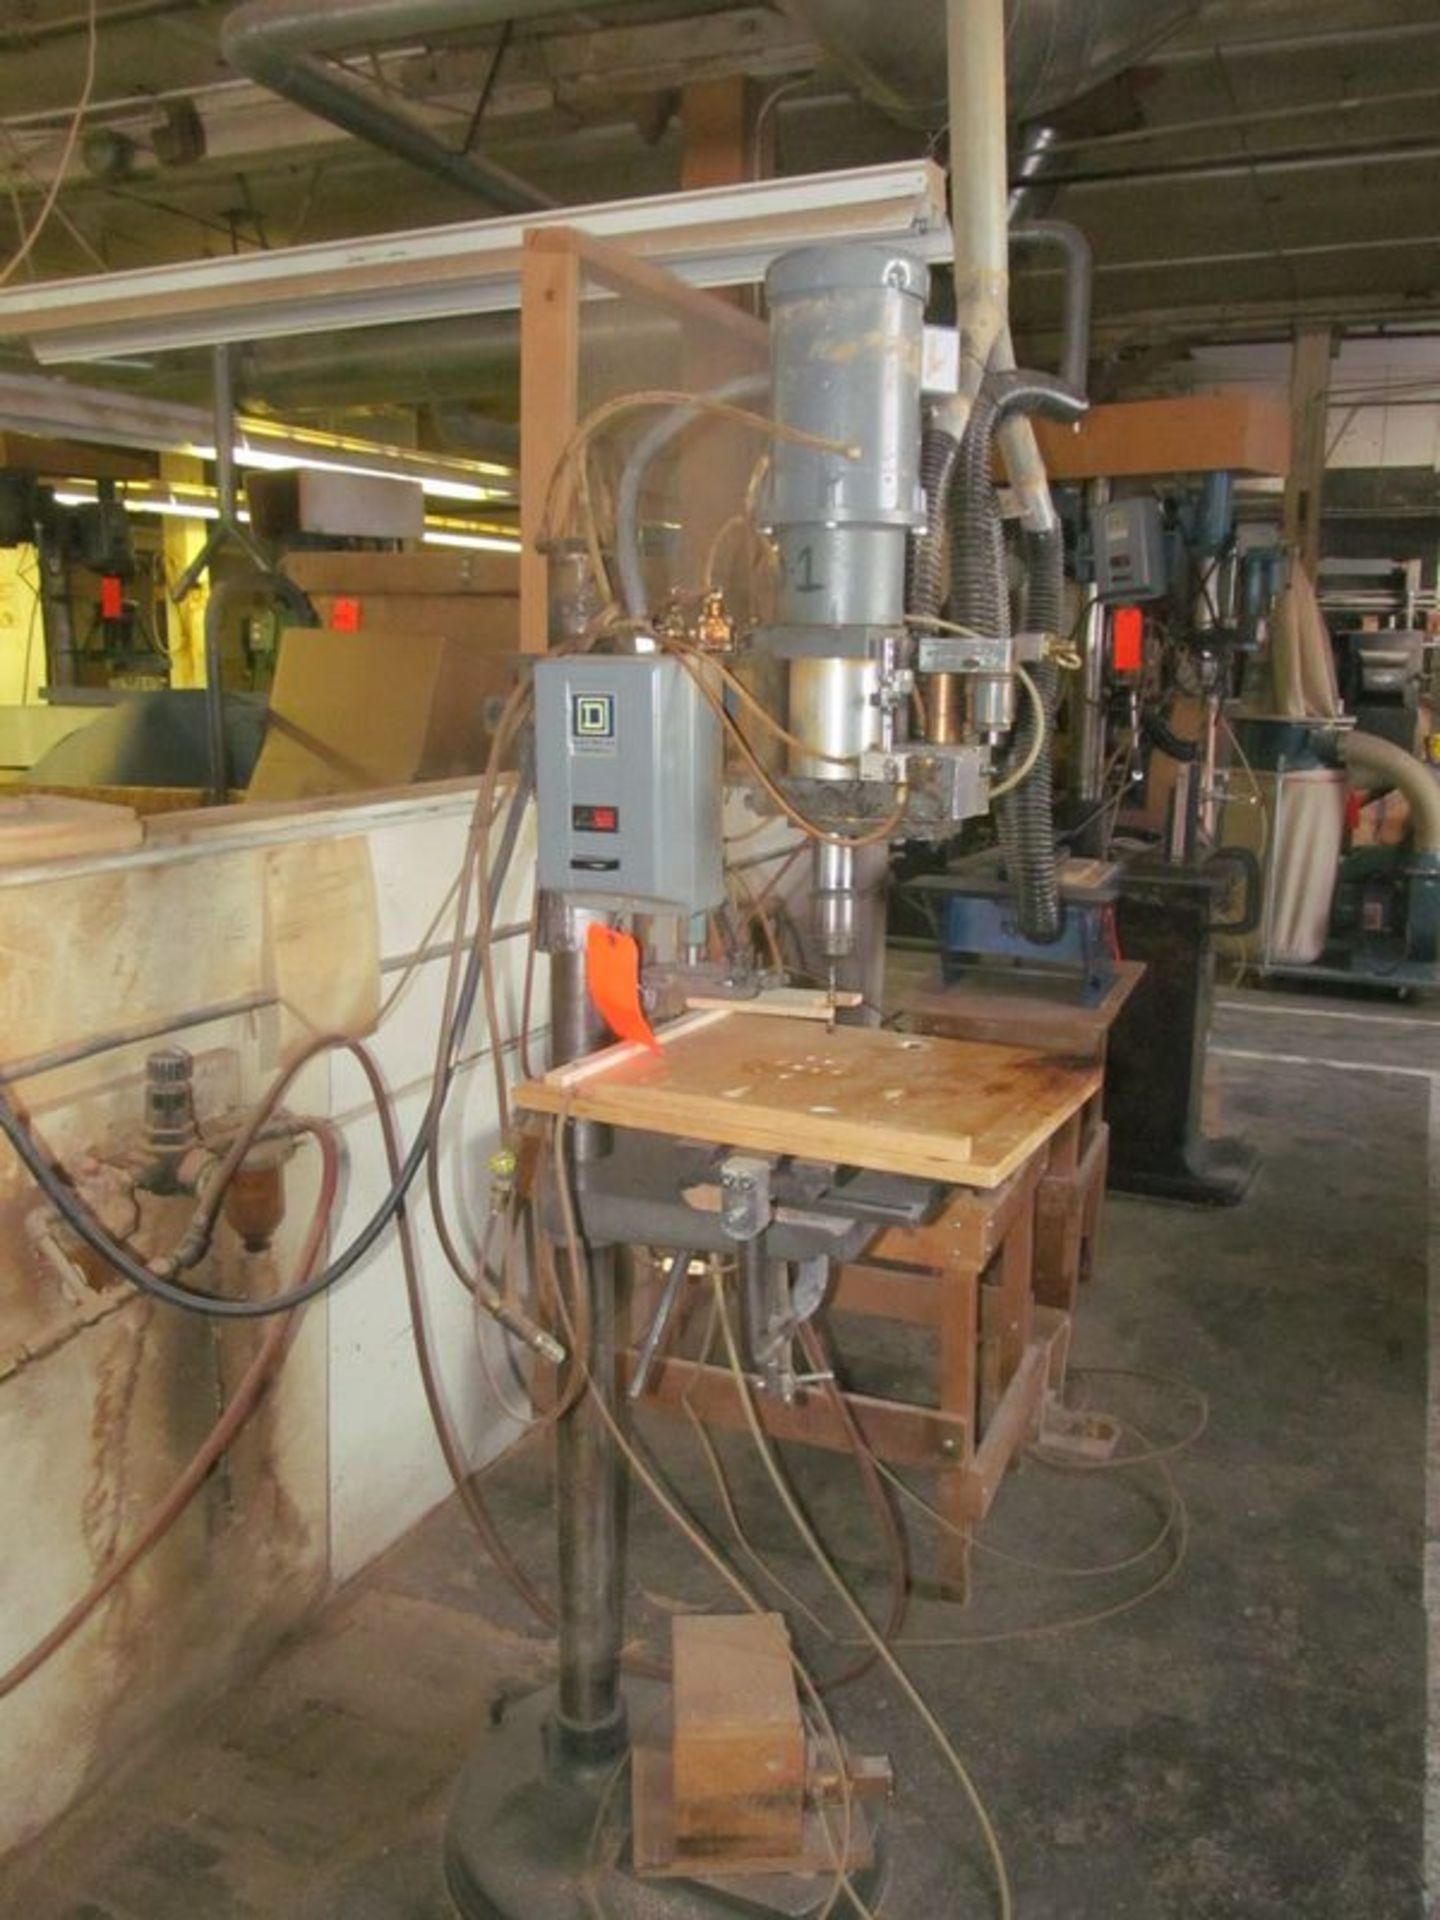 Hypneumat drill press, 1 HP, 3 PH, 220V, 4" stroke, foot pedal operated - Image 2 of 3